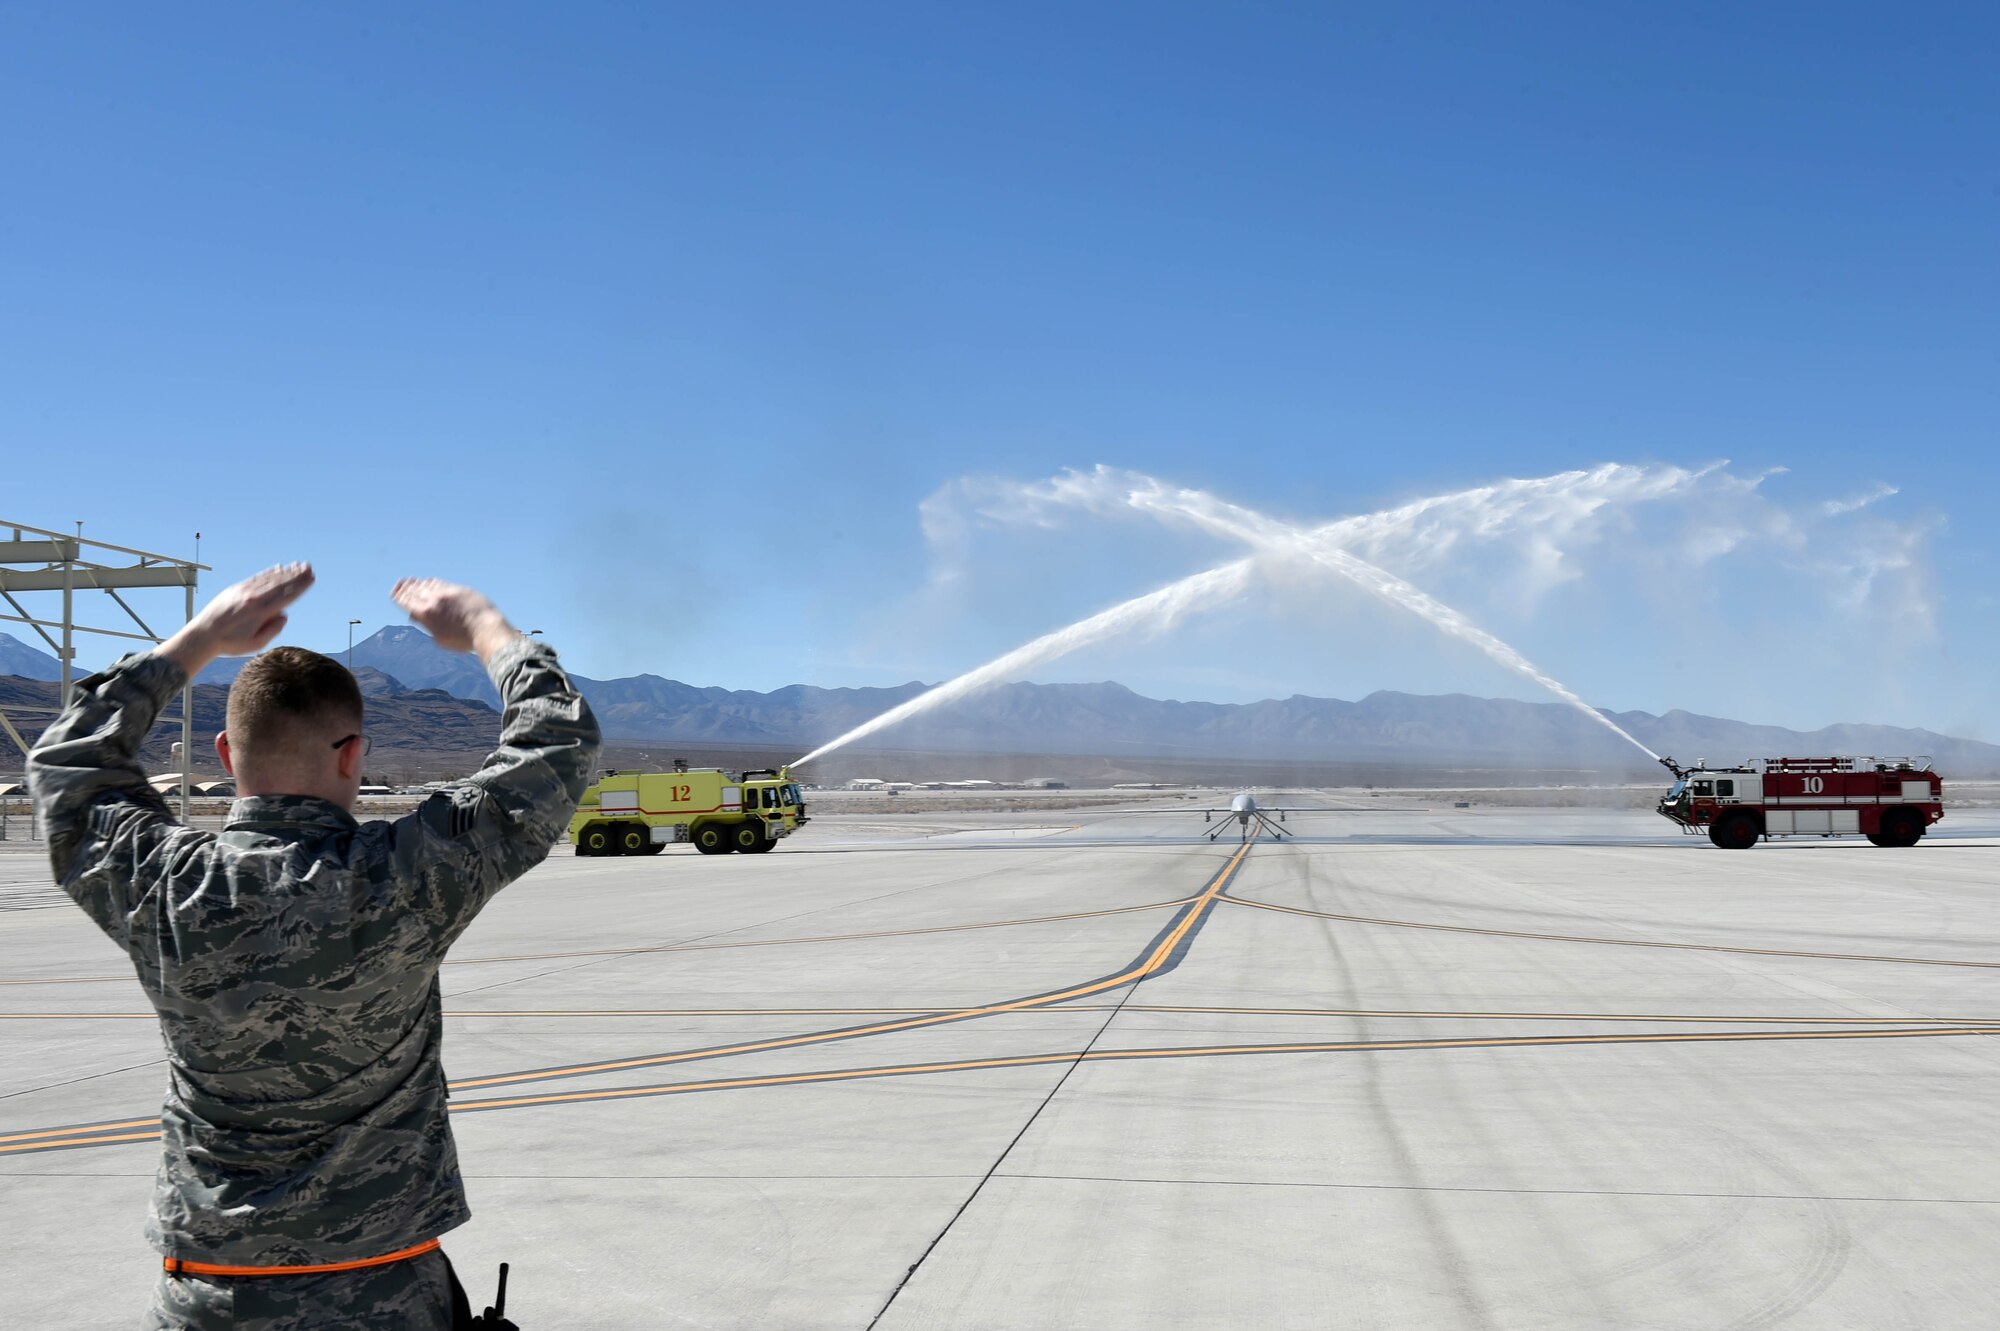 An MQ-1 Predator receives a water salute to commemorate its time in service and capabilities provided to combatant commanders and troops on the ground March 9, 2018, at Creech Air Force Base, Nev. Airmen have operated the MQ-1 for more than 20 years and provided intelligence, surveillance, reconnaissance and strike capabilities to the fight 24/7/365 across multiple areas of responsibilities. (U.S. Air Force photo by Senior Airman James Thompson)